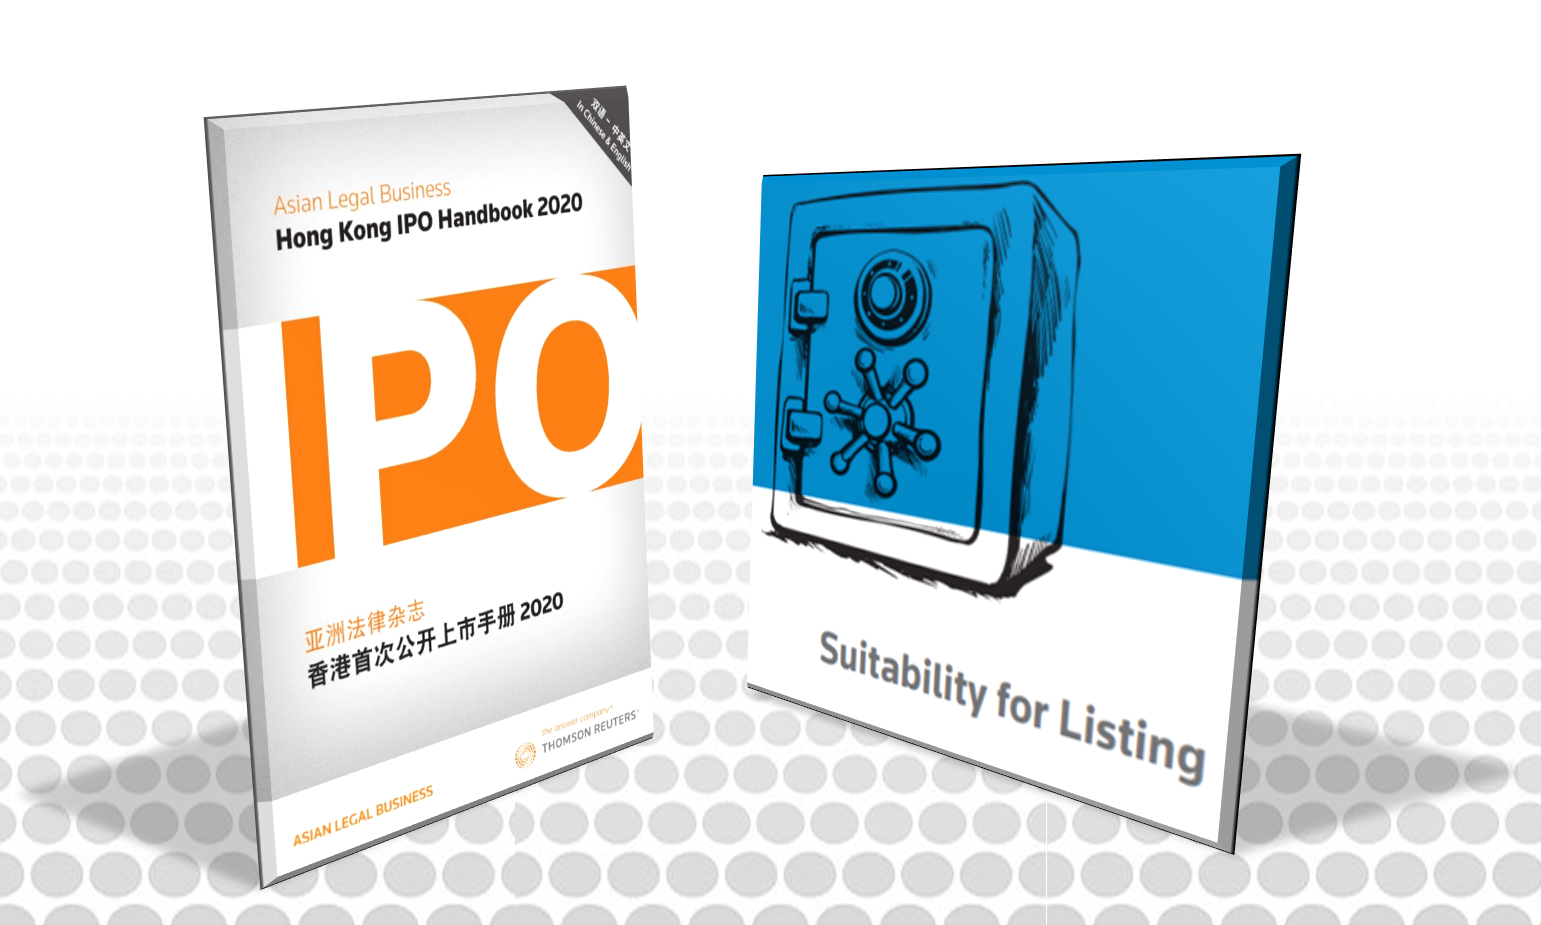 ONC Lawyers contributed the chapter on Suitability for Listing to the Asian Legal Business Hong Kong IPO Handbook 2020